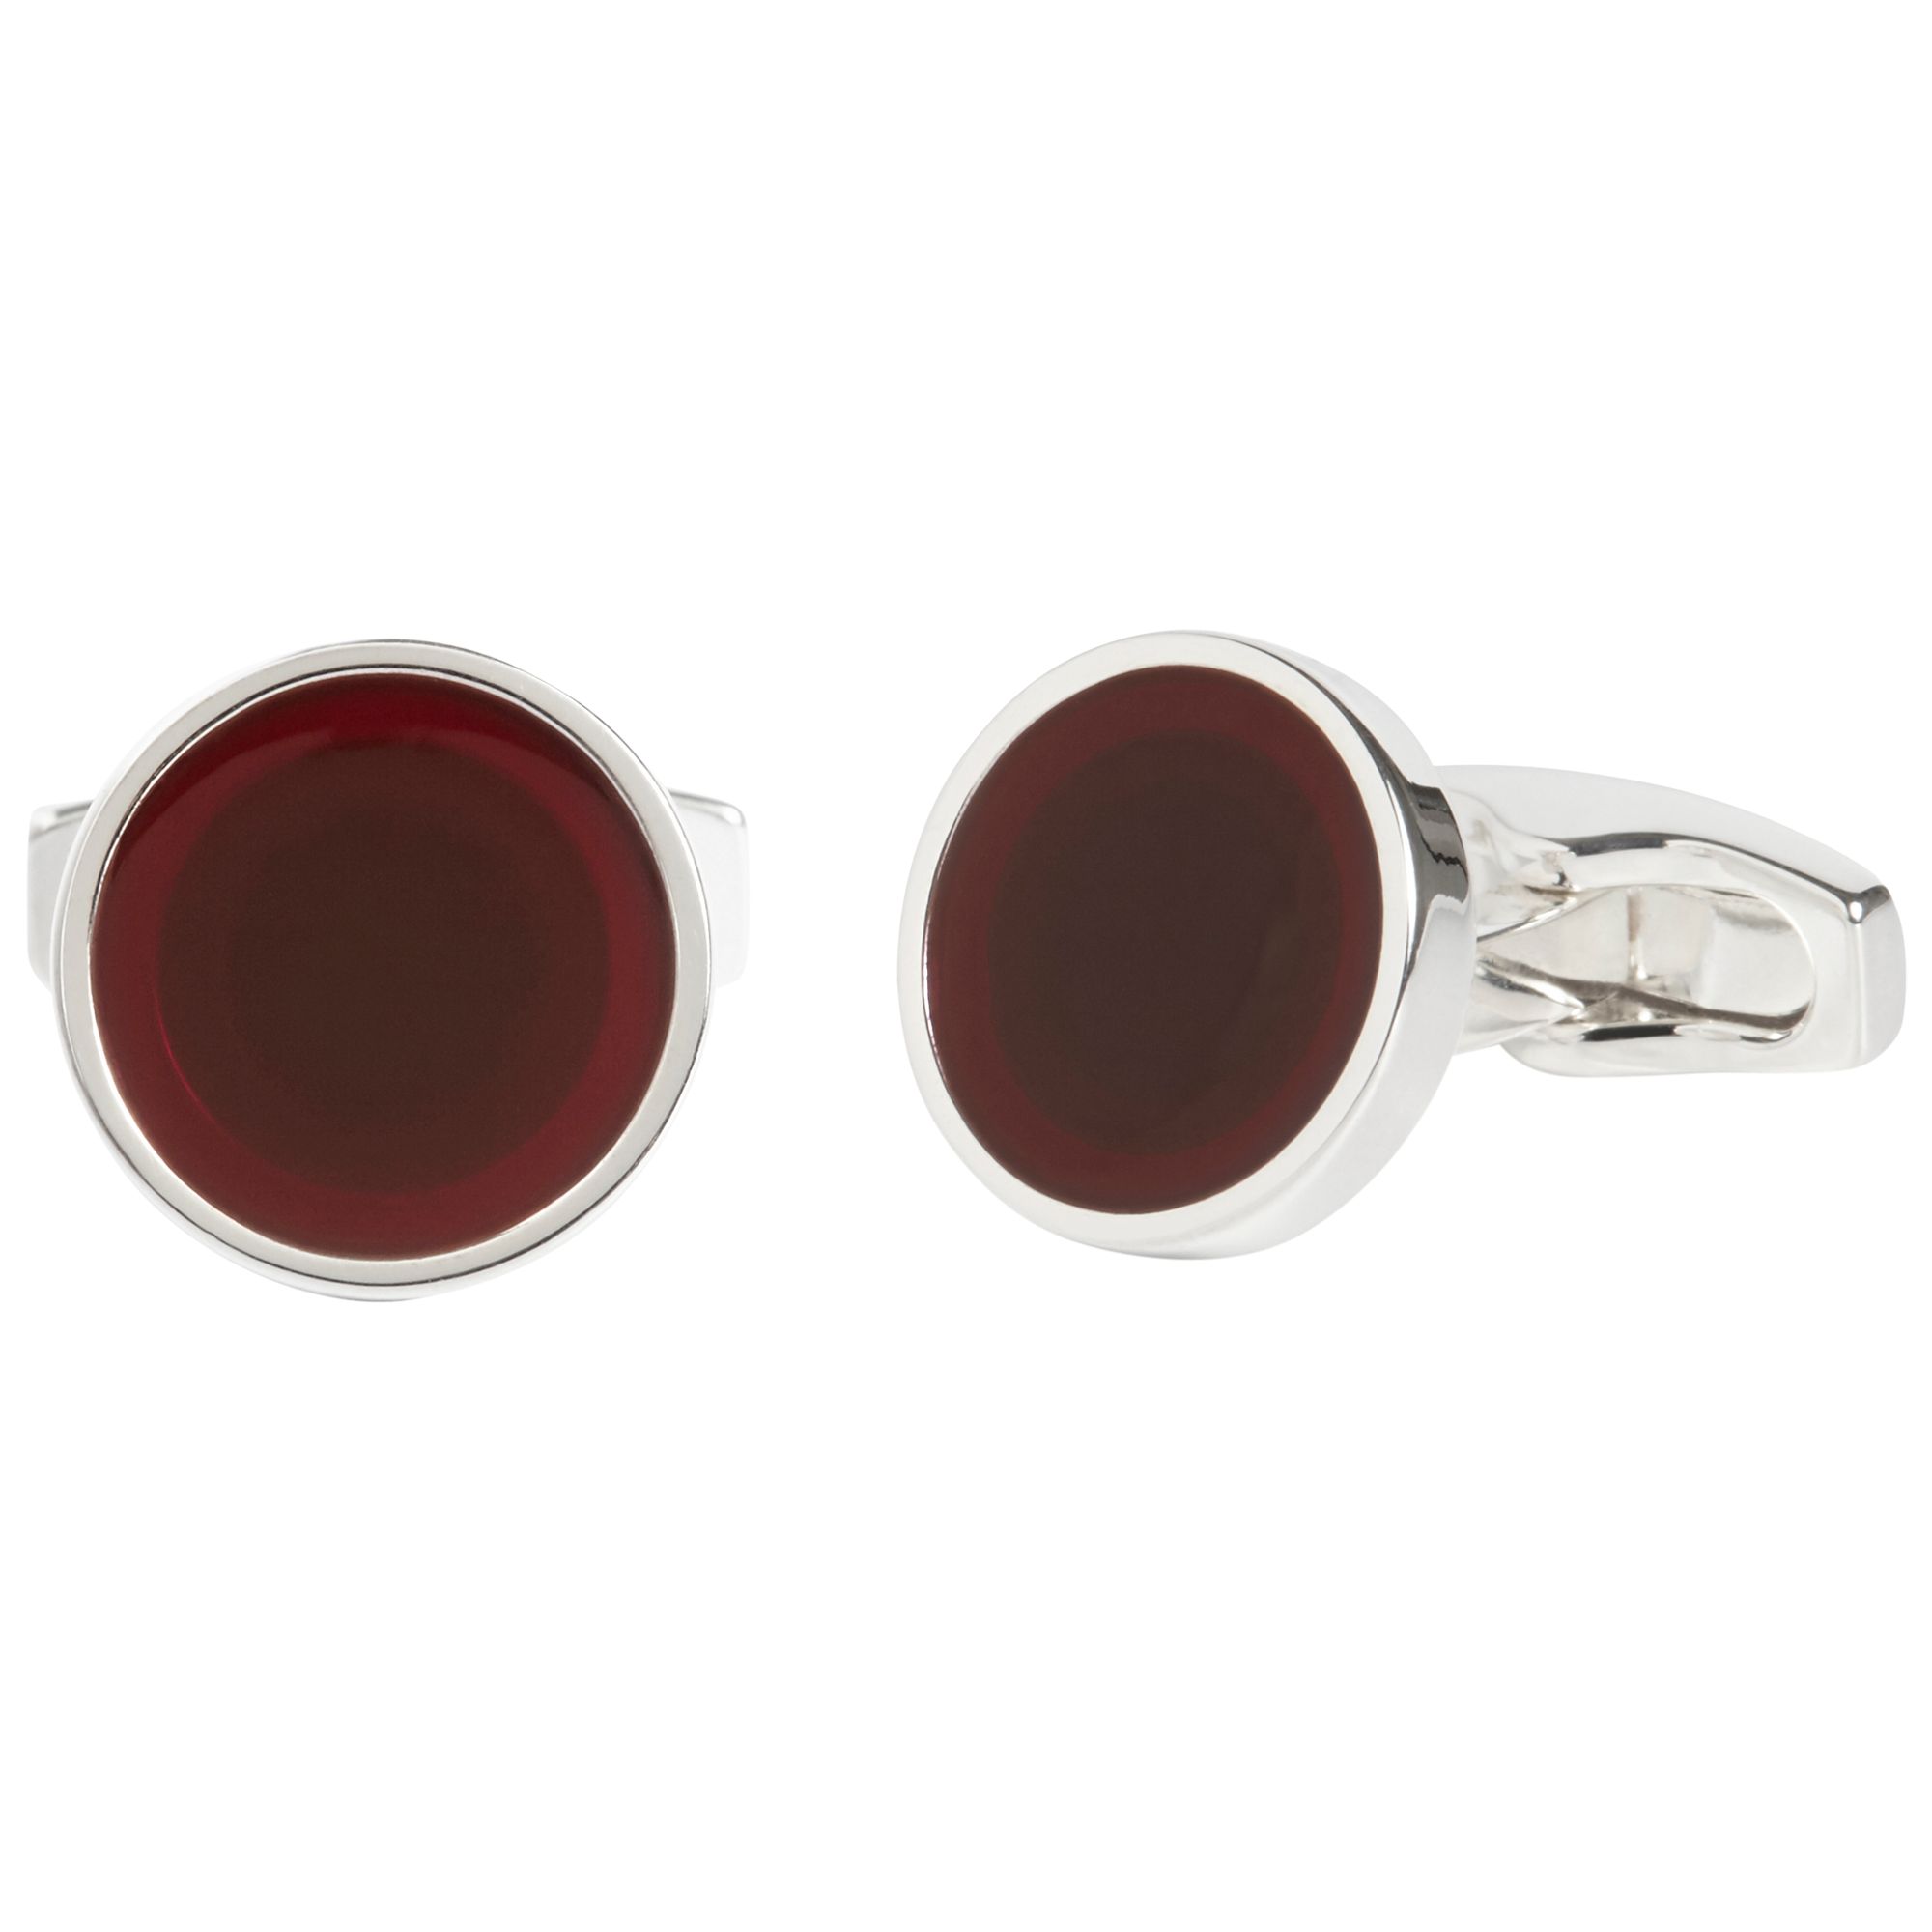 Simon Carter for John Lewis Silver Plated Round Enamel Cufflinks, Red